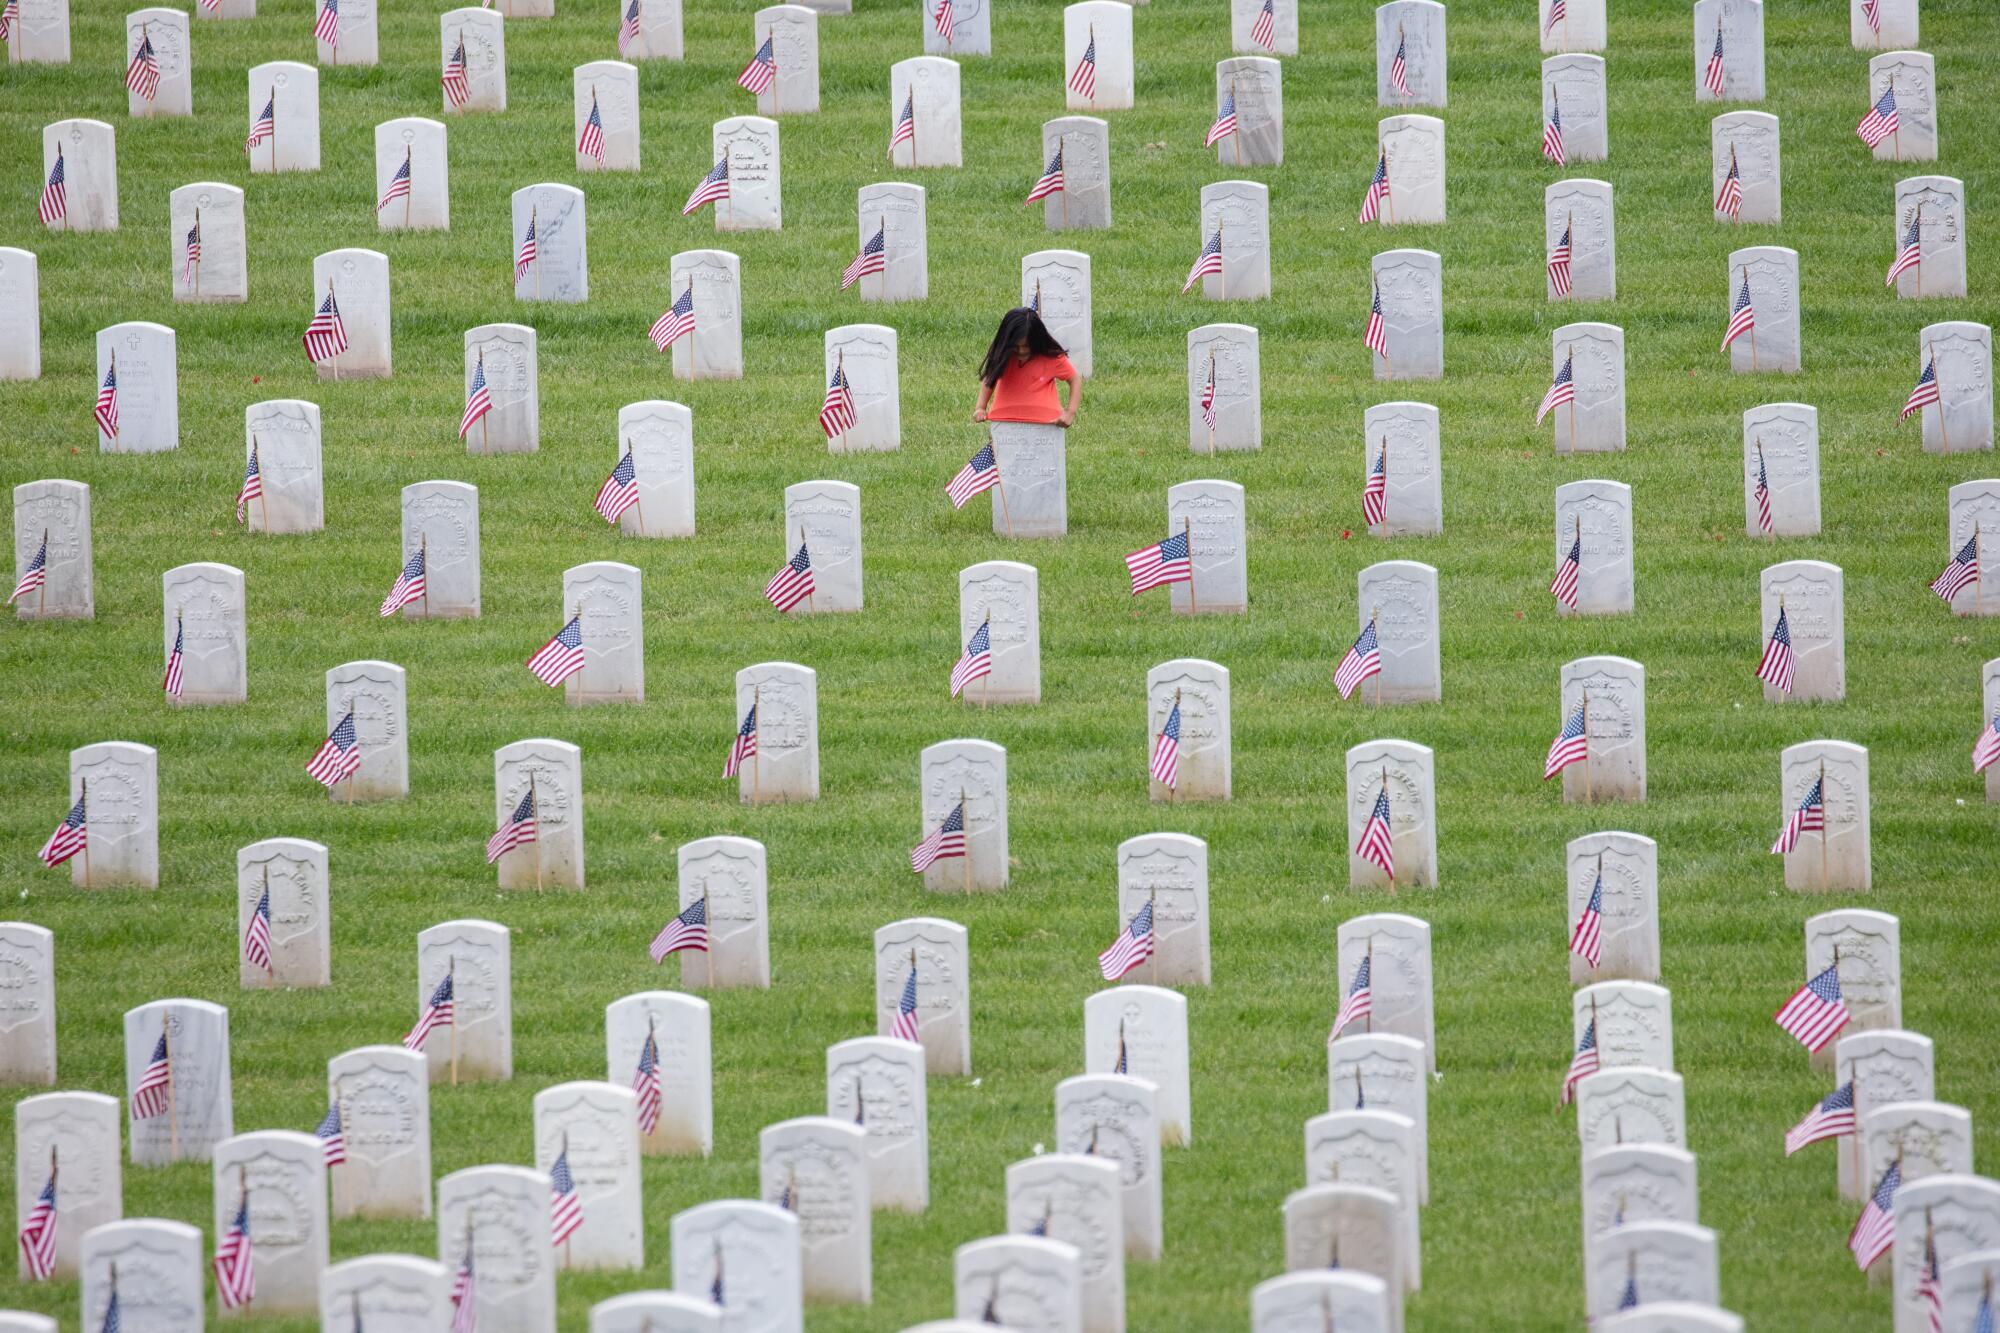 A young girl tries to fit her shirt over the top of a headstone on Memorial Day, at the Los Angeles National Cemetery